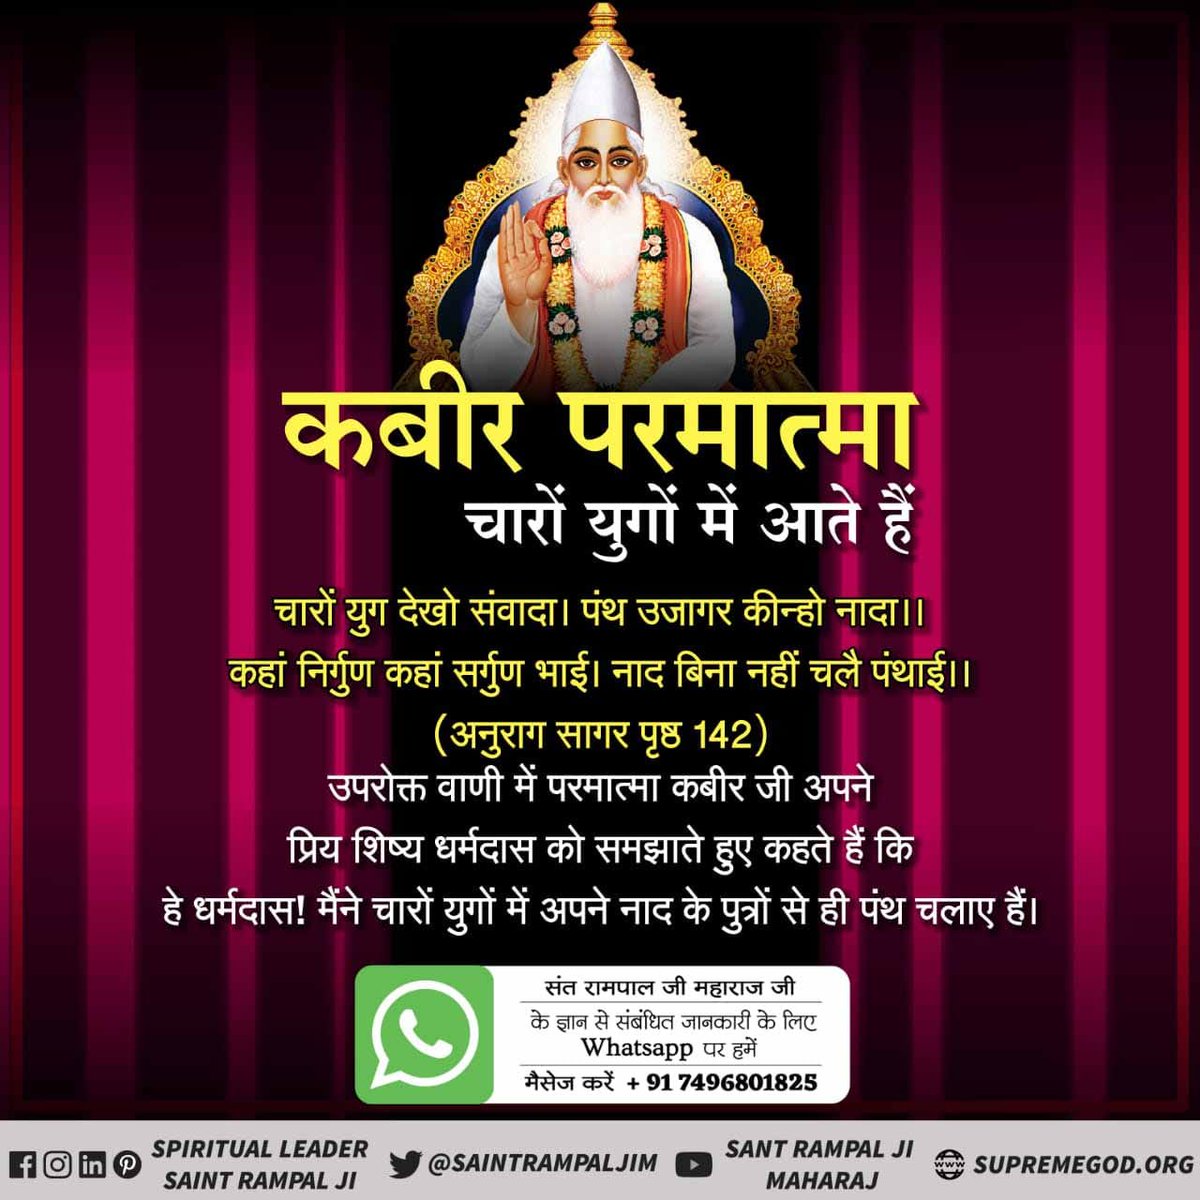 #जगत_उद्धारक_संत_रामपालजी
A Nigura man can also become like a saint, if he finds an experienced and complete Sadguru. By giving him the mantra of the sacred name of Ram, that is, by imparting initiation into self-knowledge, he can liberate him from all the